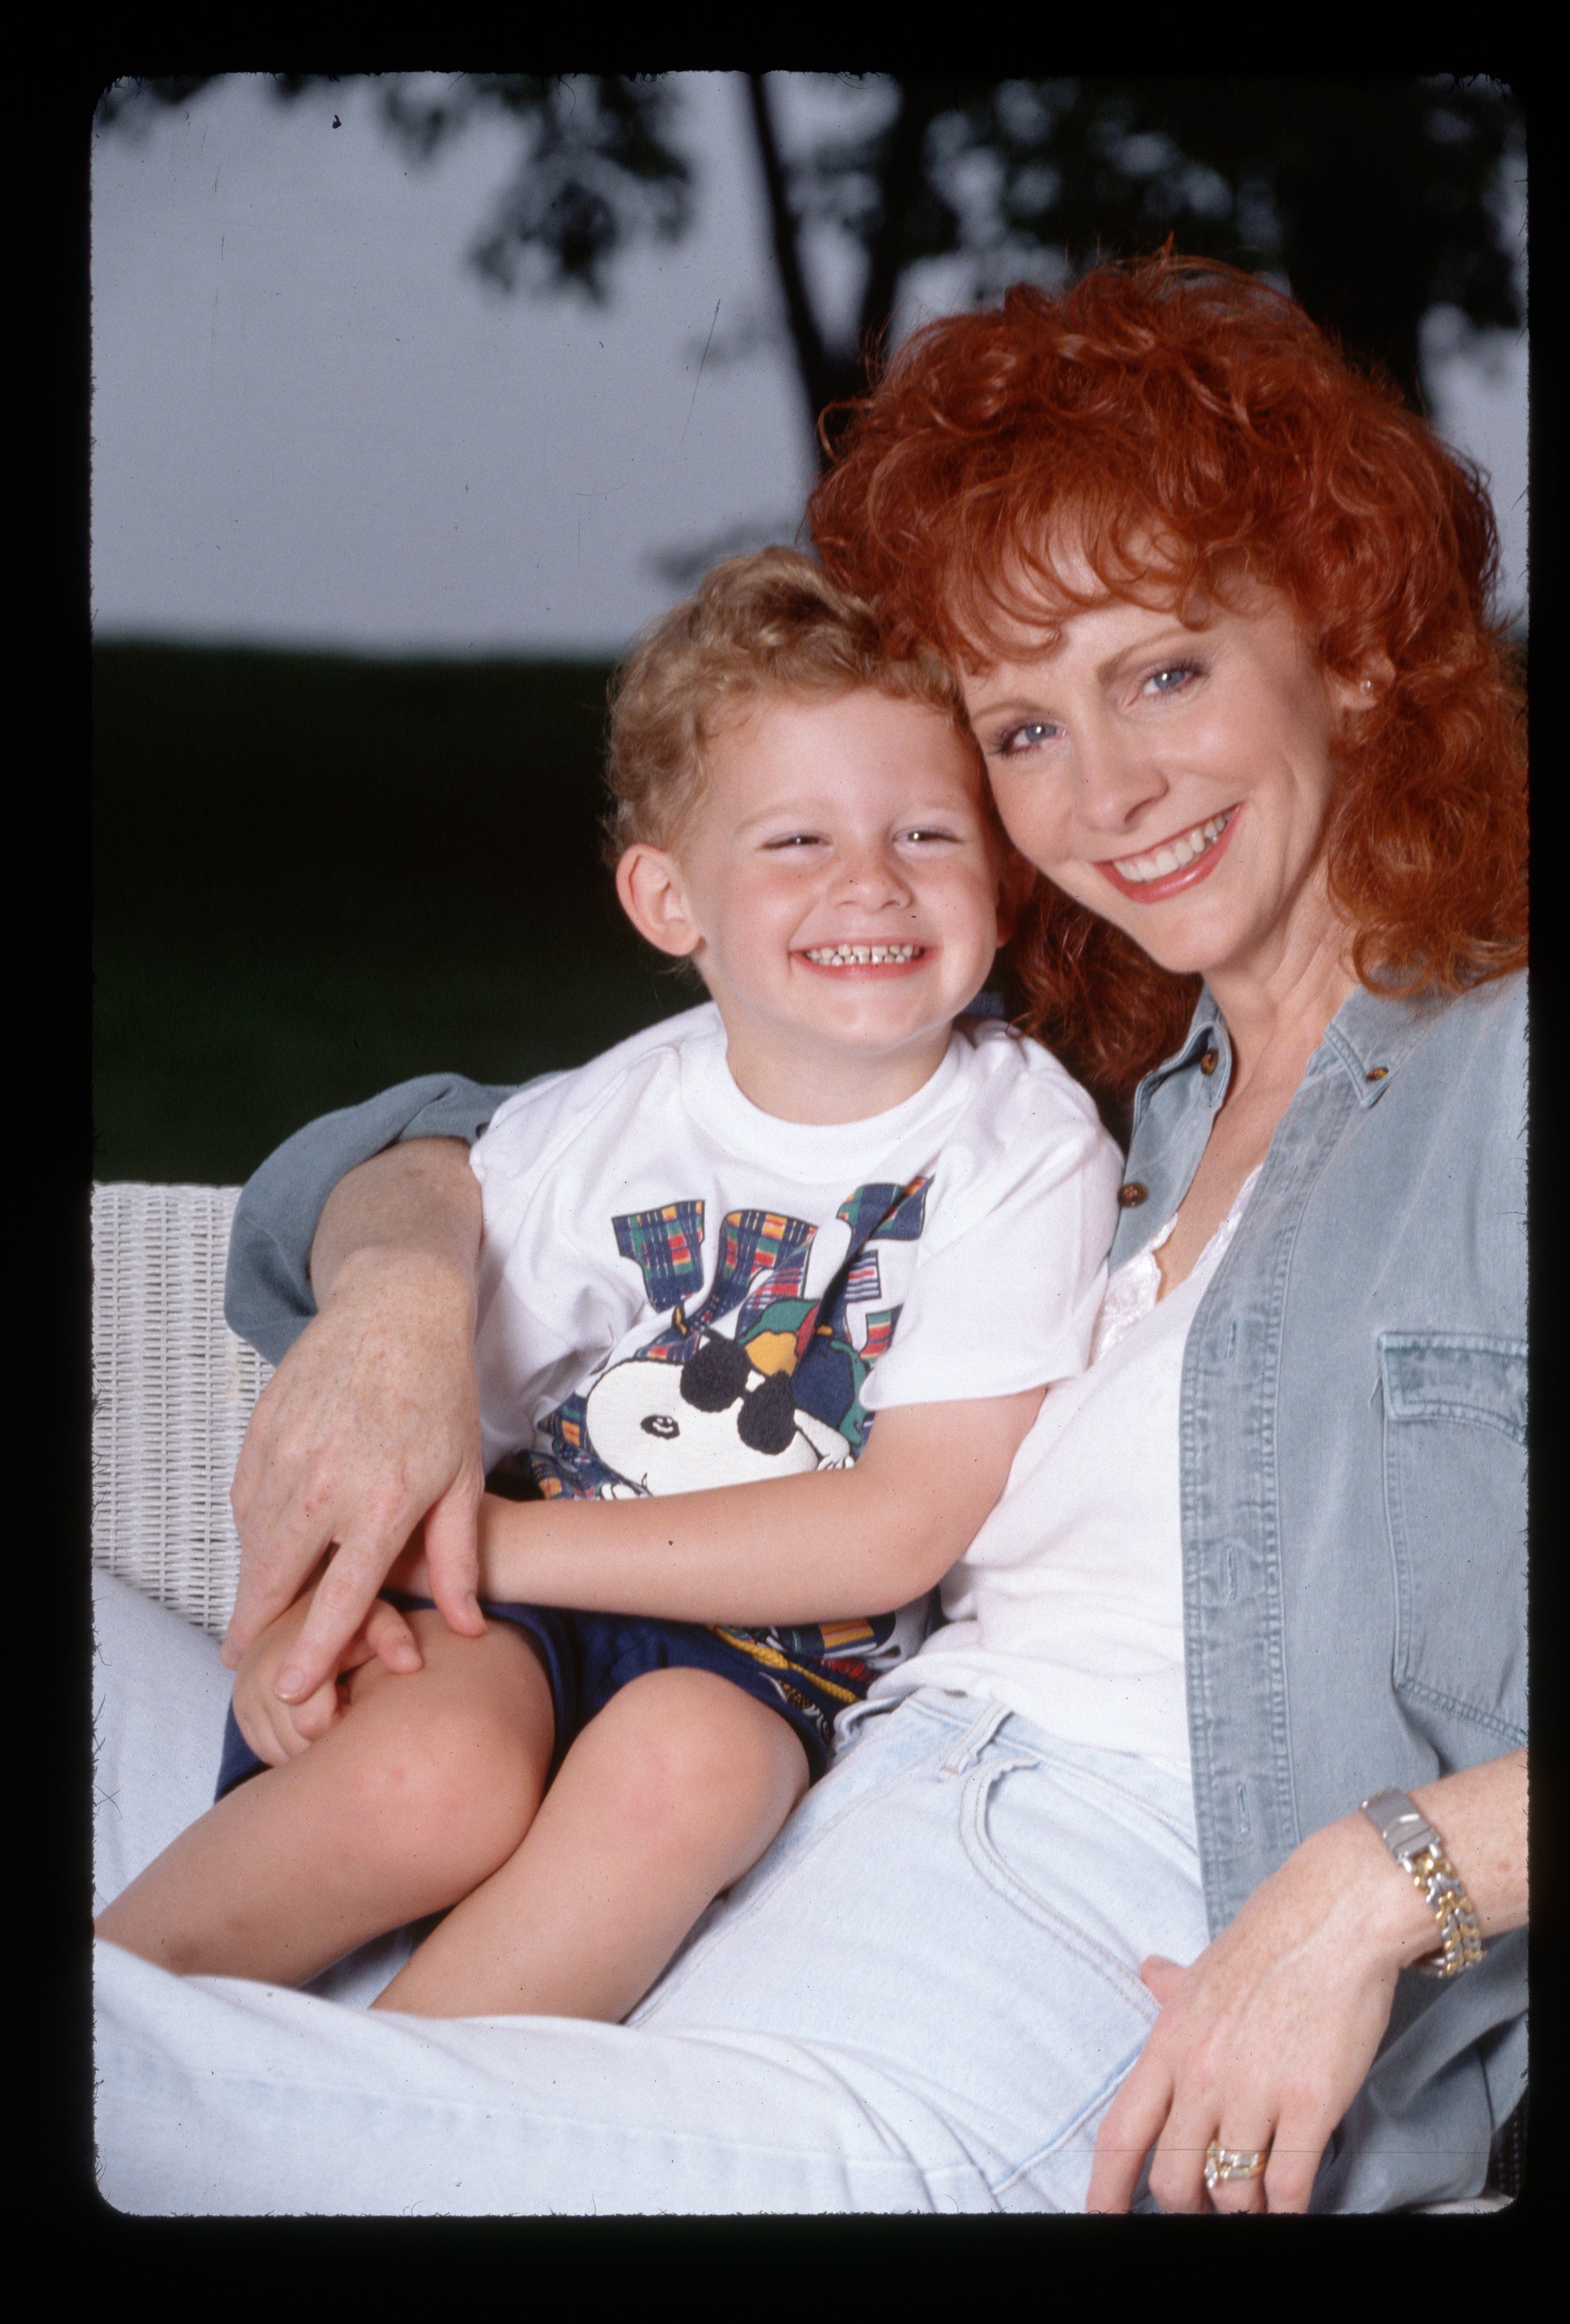 Reba McEntire hugs her young son Shelby Steven McEntire Blackstock, circa 1994 | Source: Getty Images